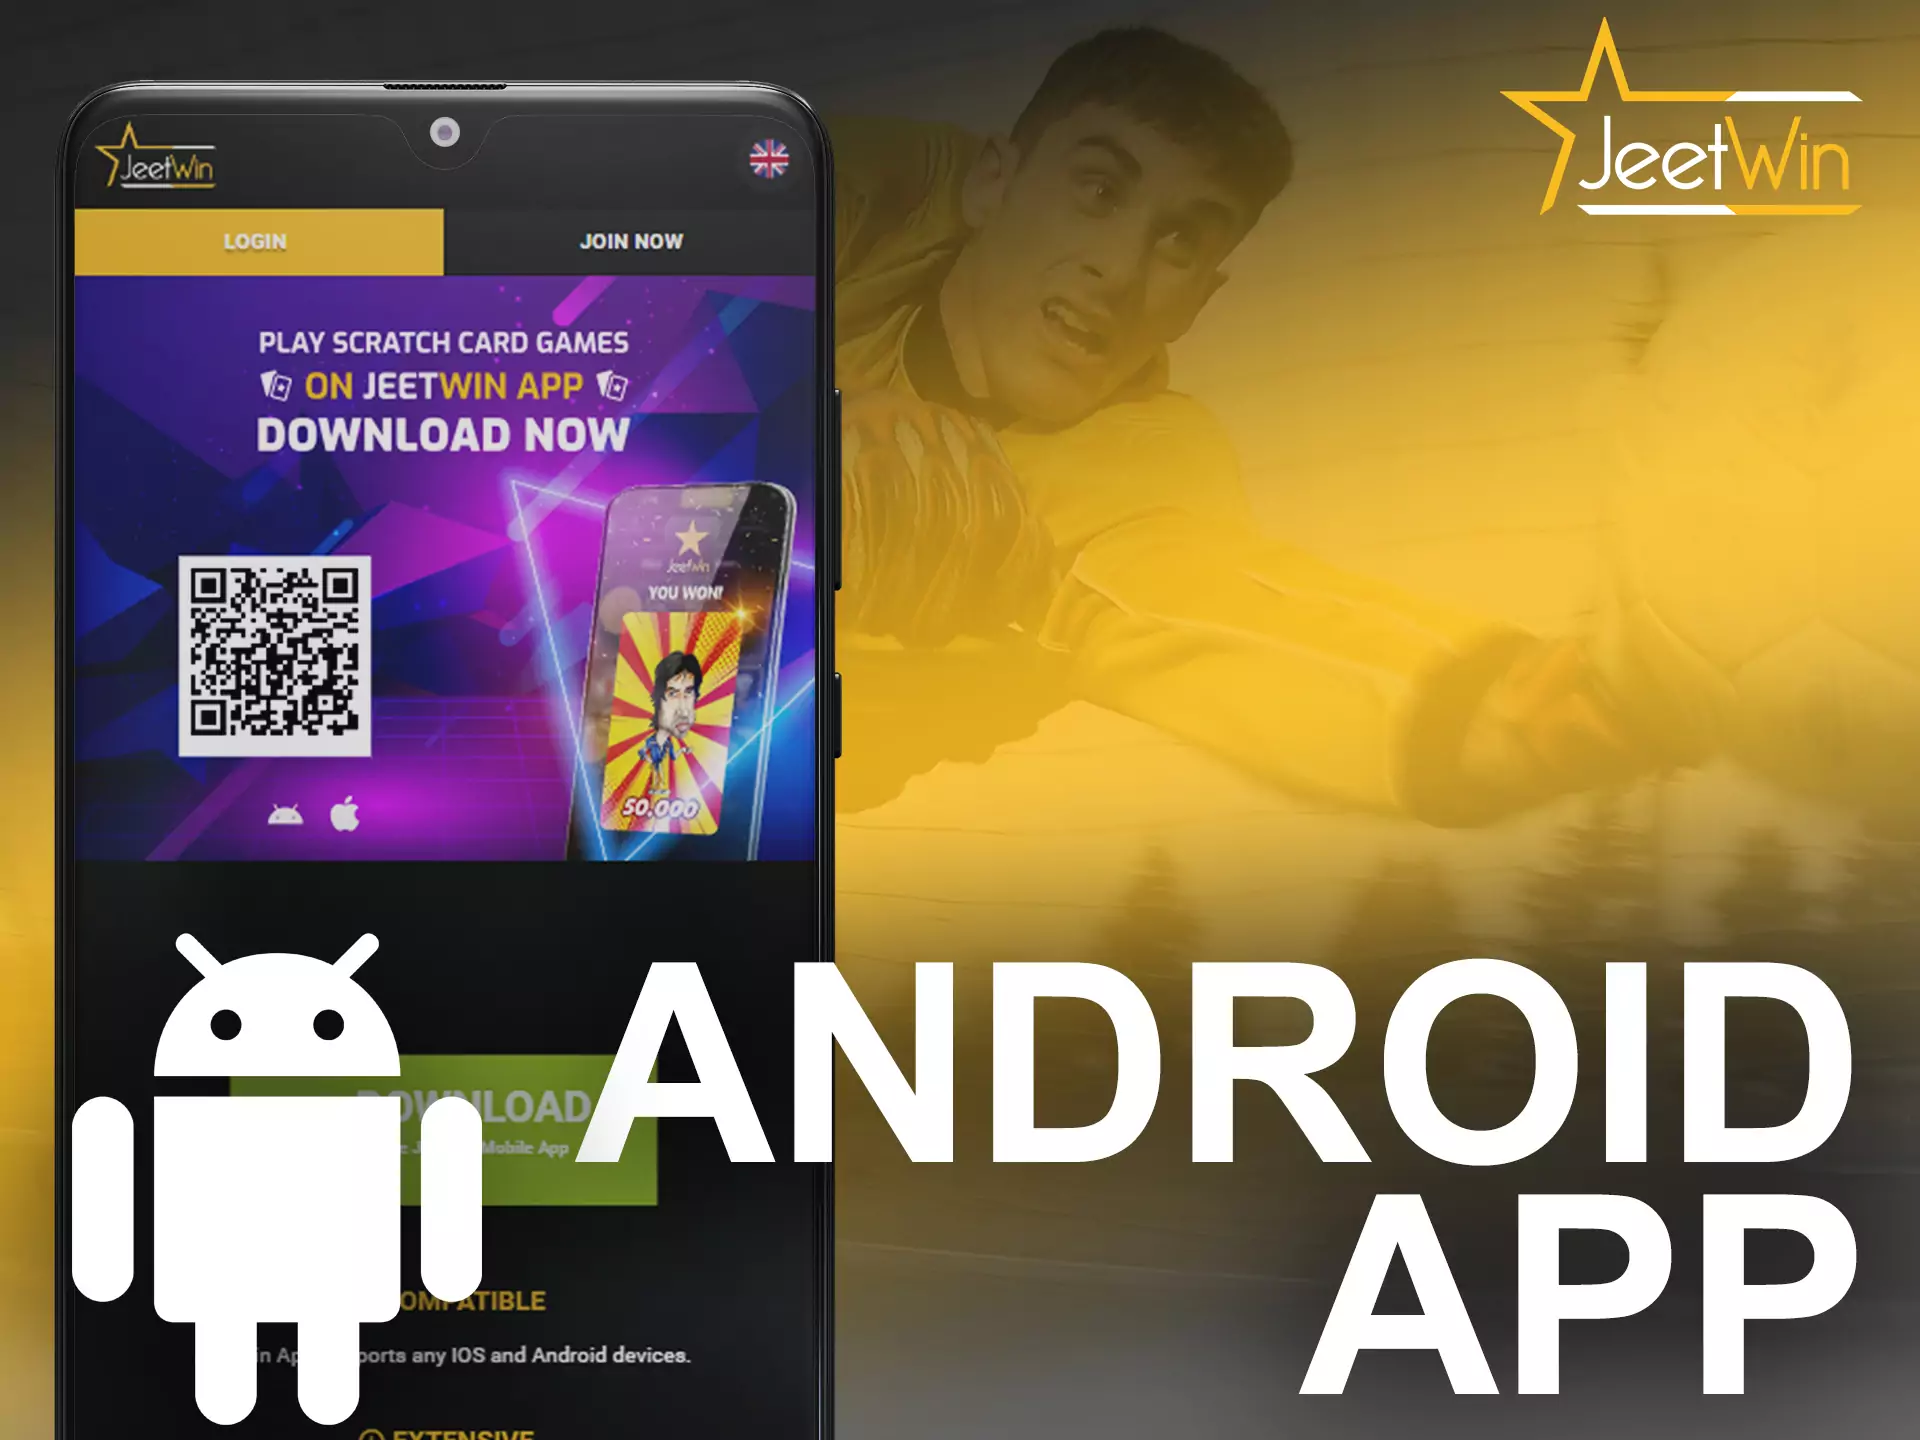 Use the JeetWin app for Android devices.